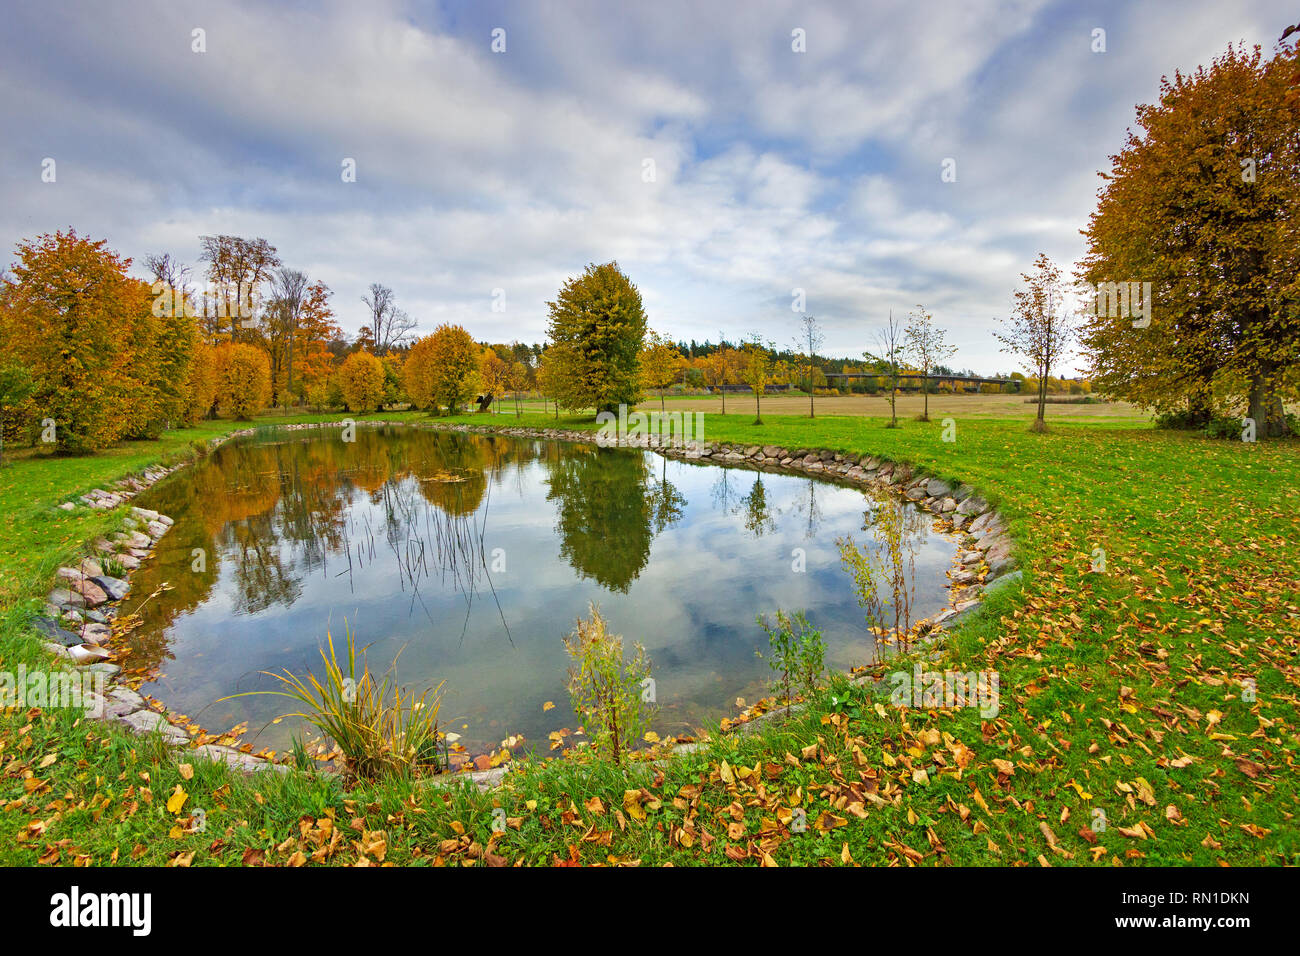 Artificial landscaping waterscape surrounded by the fall season's scenery in Barockparken (Barock park), Upplands Vasby, STHLM, Sweden Stock Photo